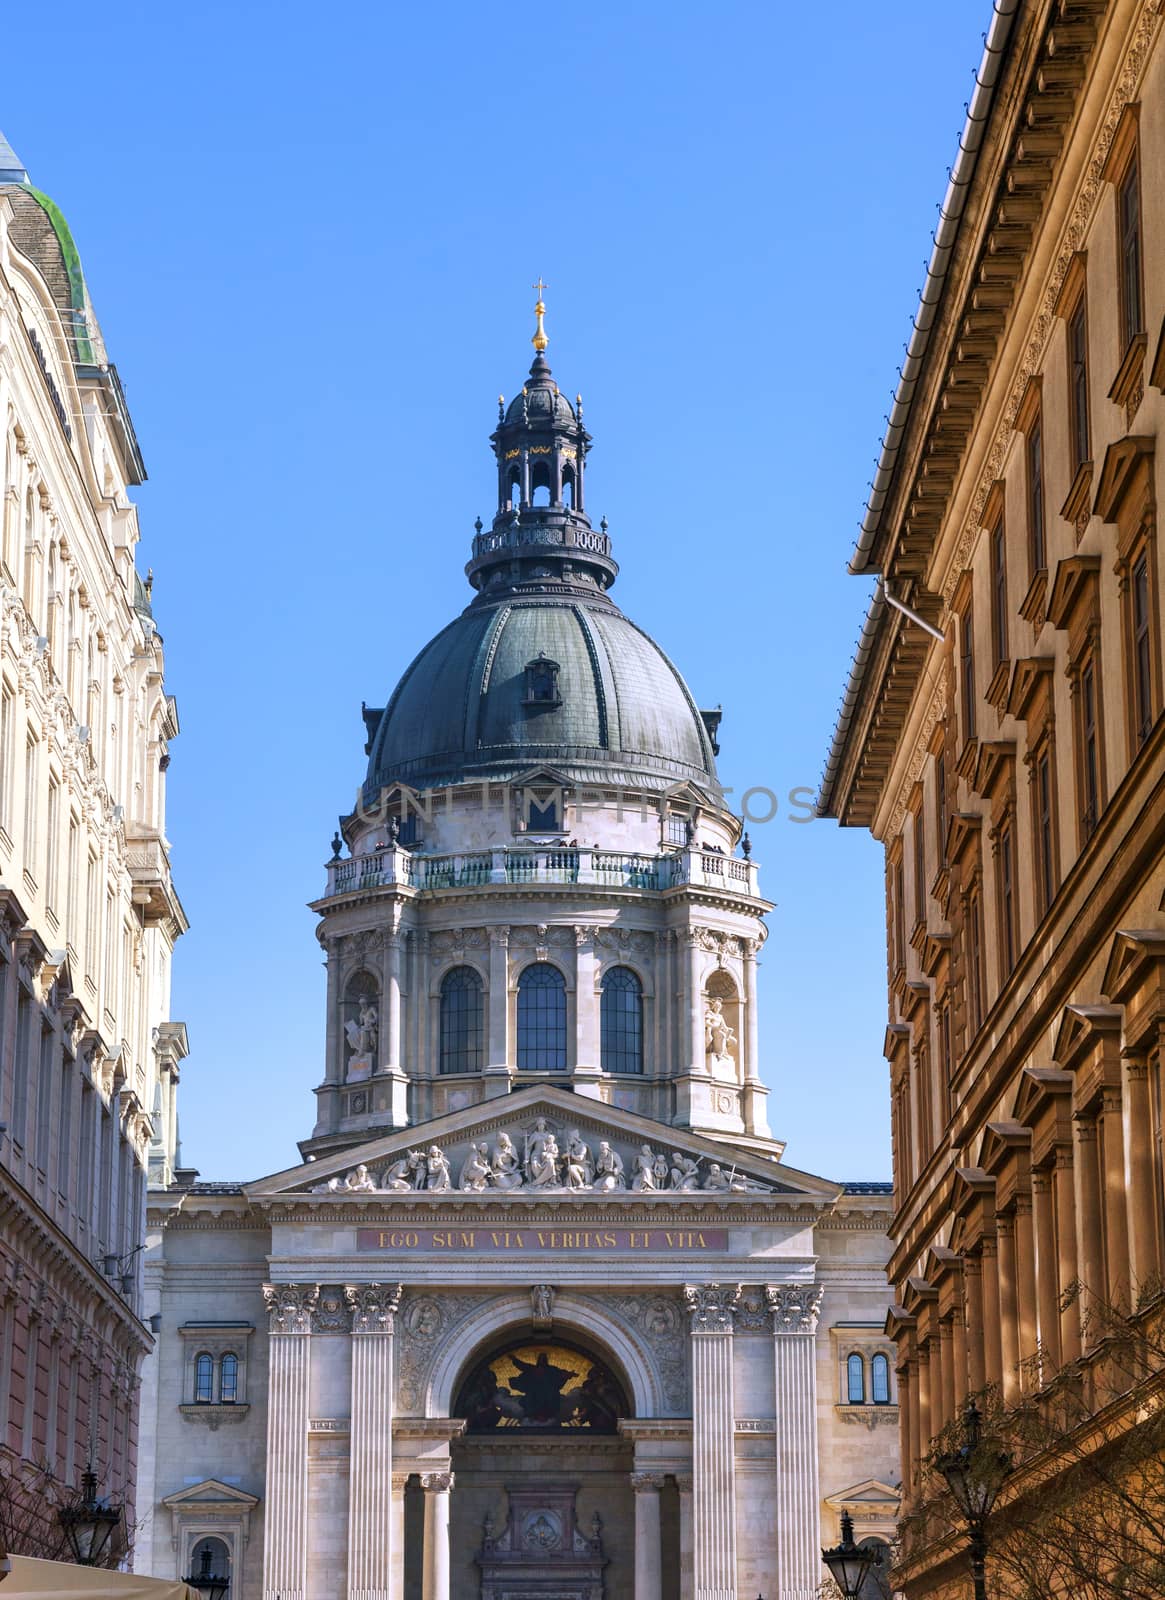 Dome of St. Stephen's Basilica in Budapest, Hungary. The text on the facade is Latin for -I am the way and the truth and the life-